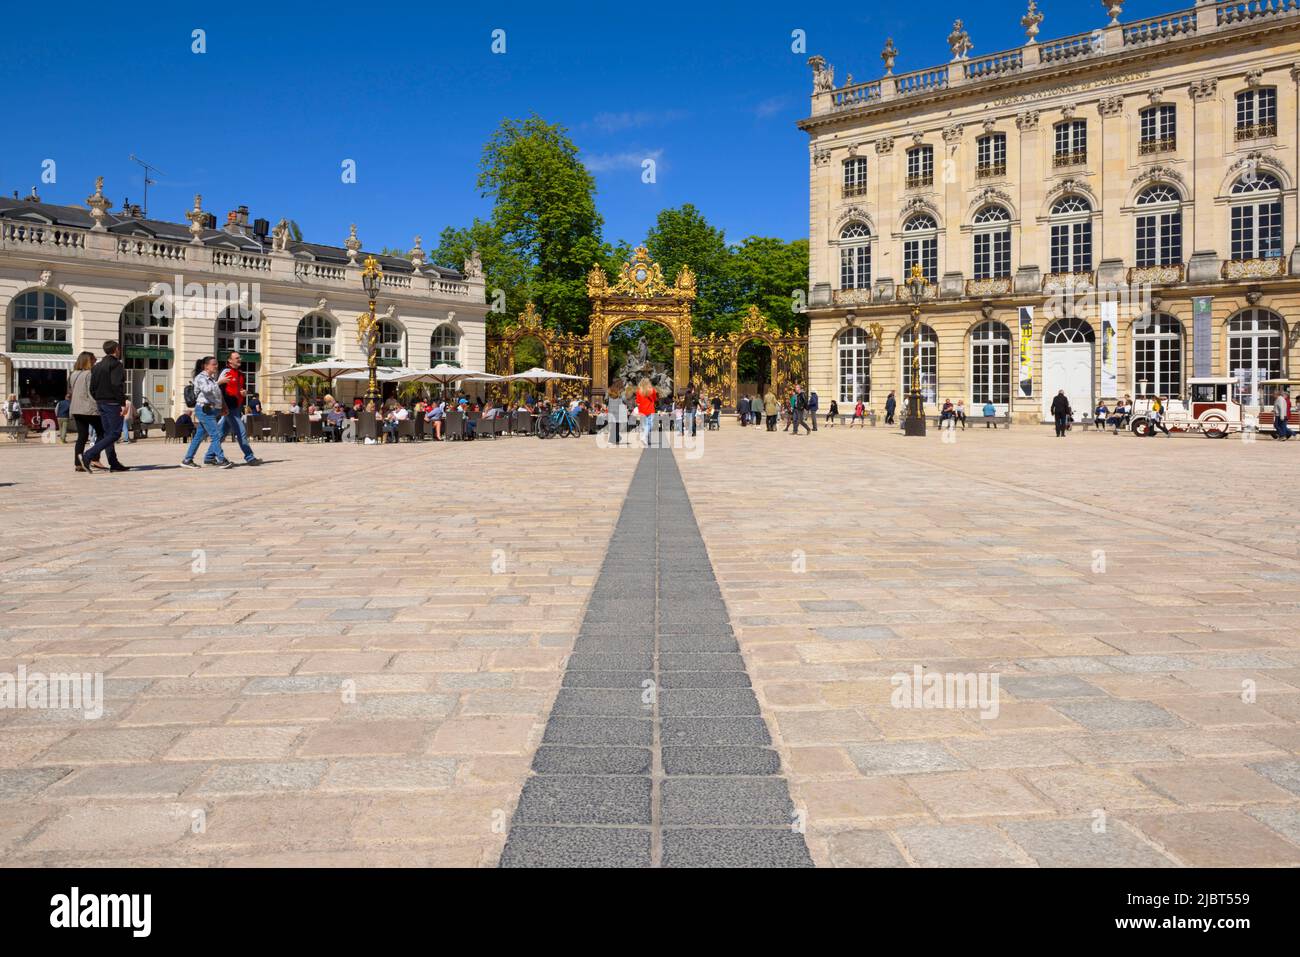 France, Meurthe and Moselle, Nancy, place Stanislas (former Place Royale) built by Stanislas Leszczynski, king of Poland and last duke of Lorraine in the eighteenth century, classified World Heritage of UNESCO, statue of Stanislas Leszczynski with Ukrainian flag Stock Photo